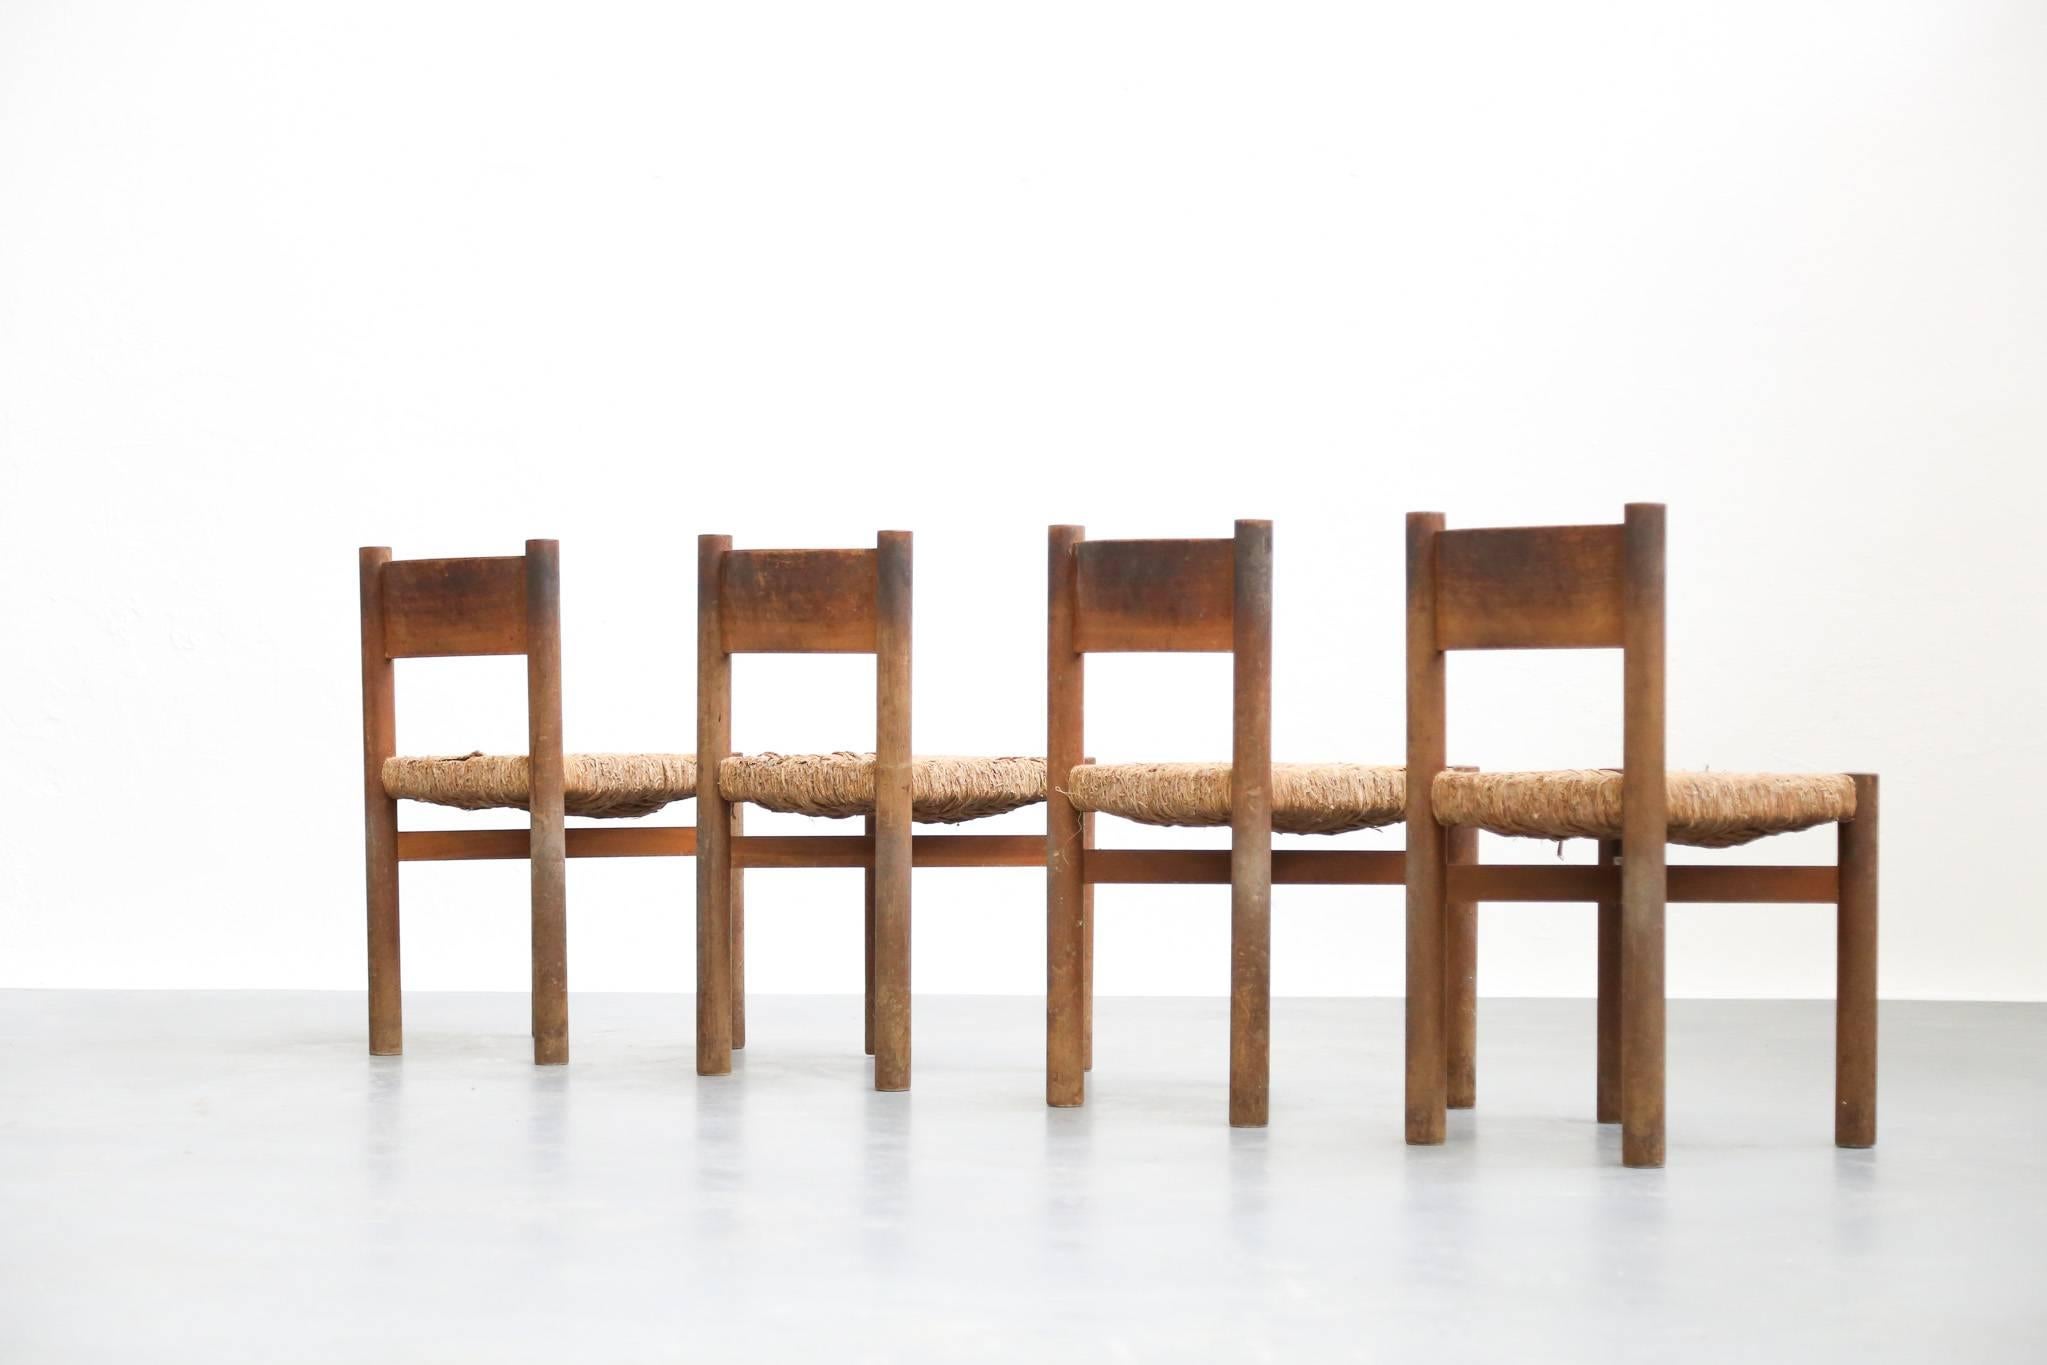 Mid-20th Century Chairs for Meribel Designed by Charlotte Perriand, French, 1950s Jean Prouvé